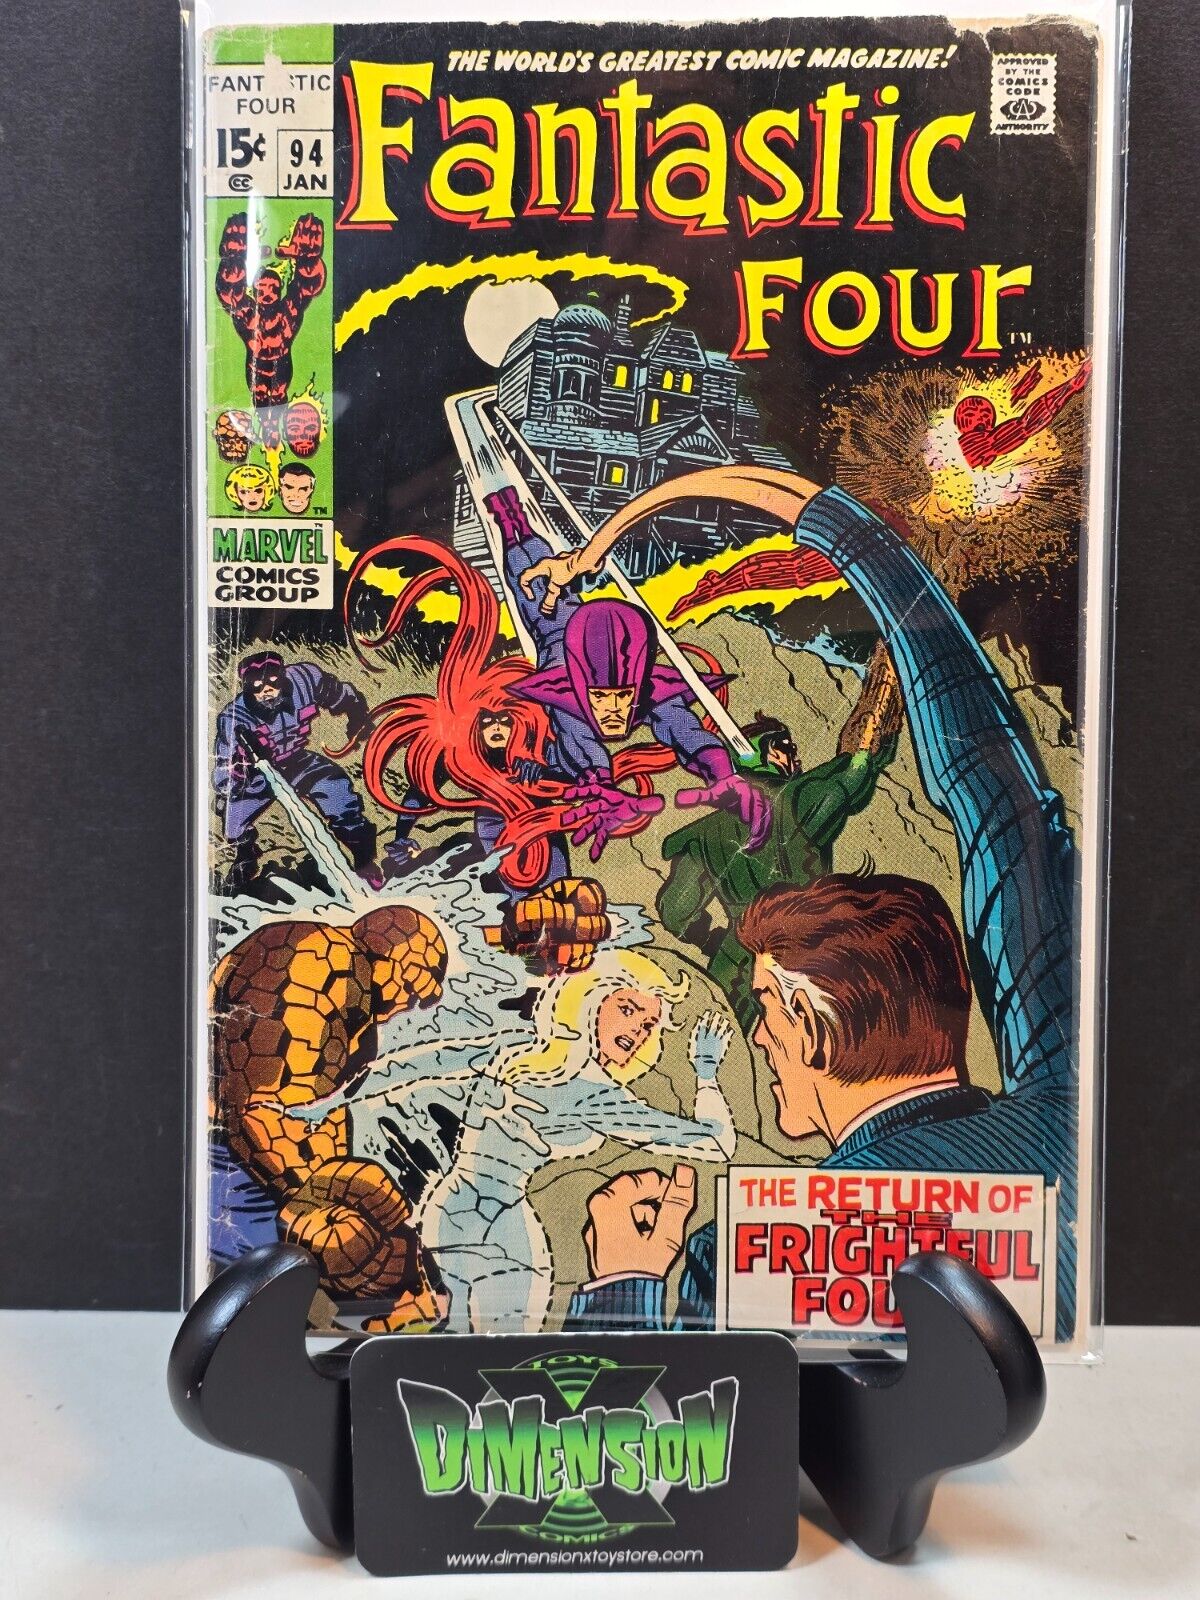 FANTASTIC FOUR #94 1ST APP OF AGATHA HARKNESS MARVEL 1970 GD KEY SEE PICS